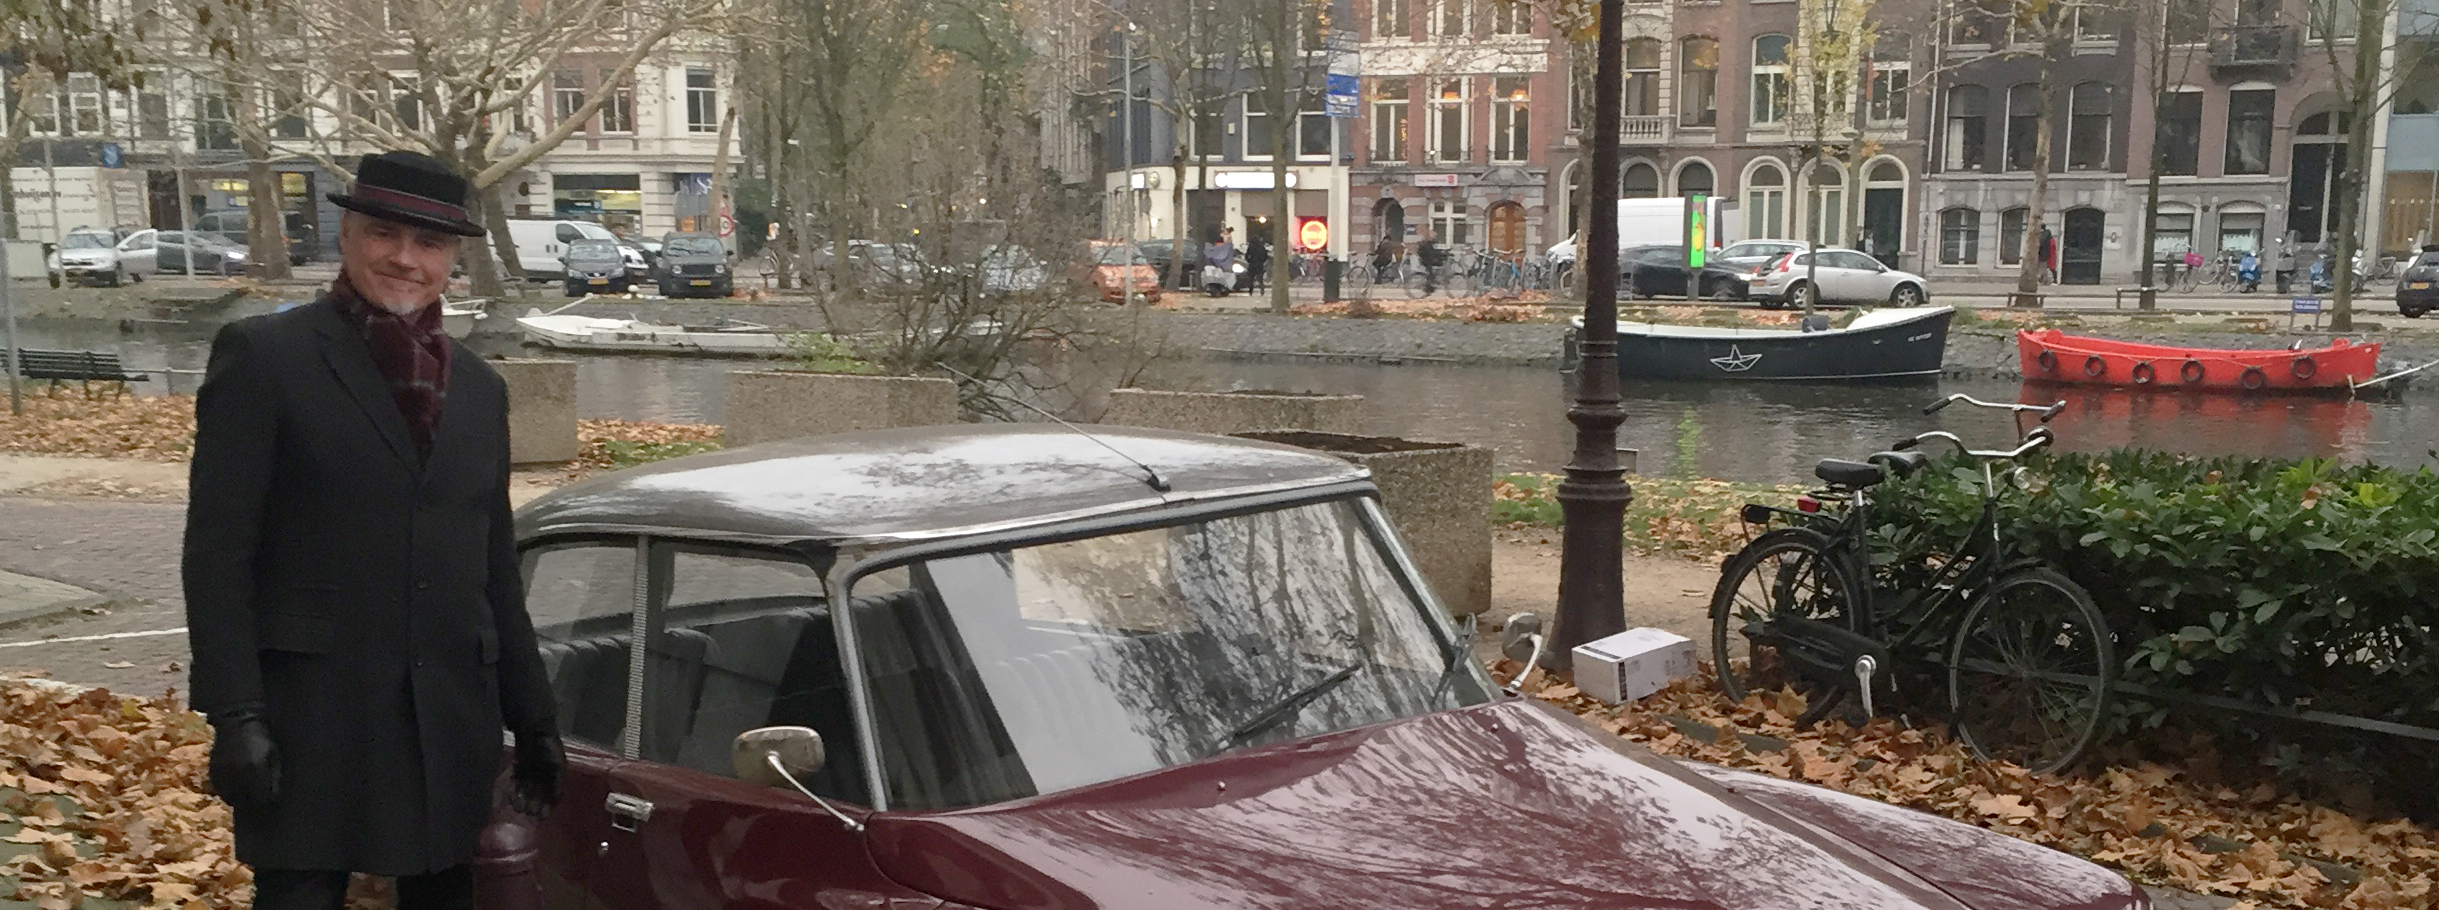 Rompa took me for a drive in Amsterdam